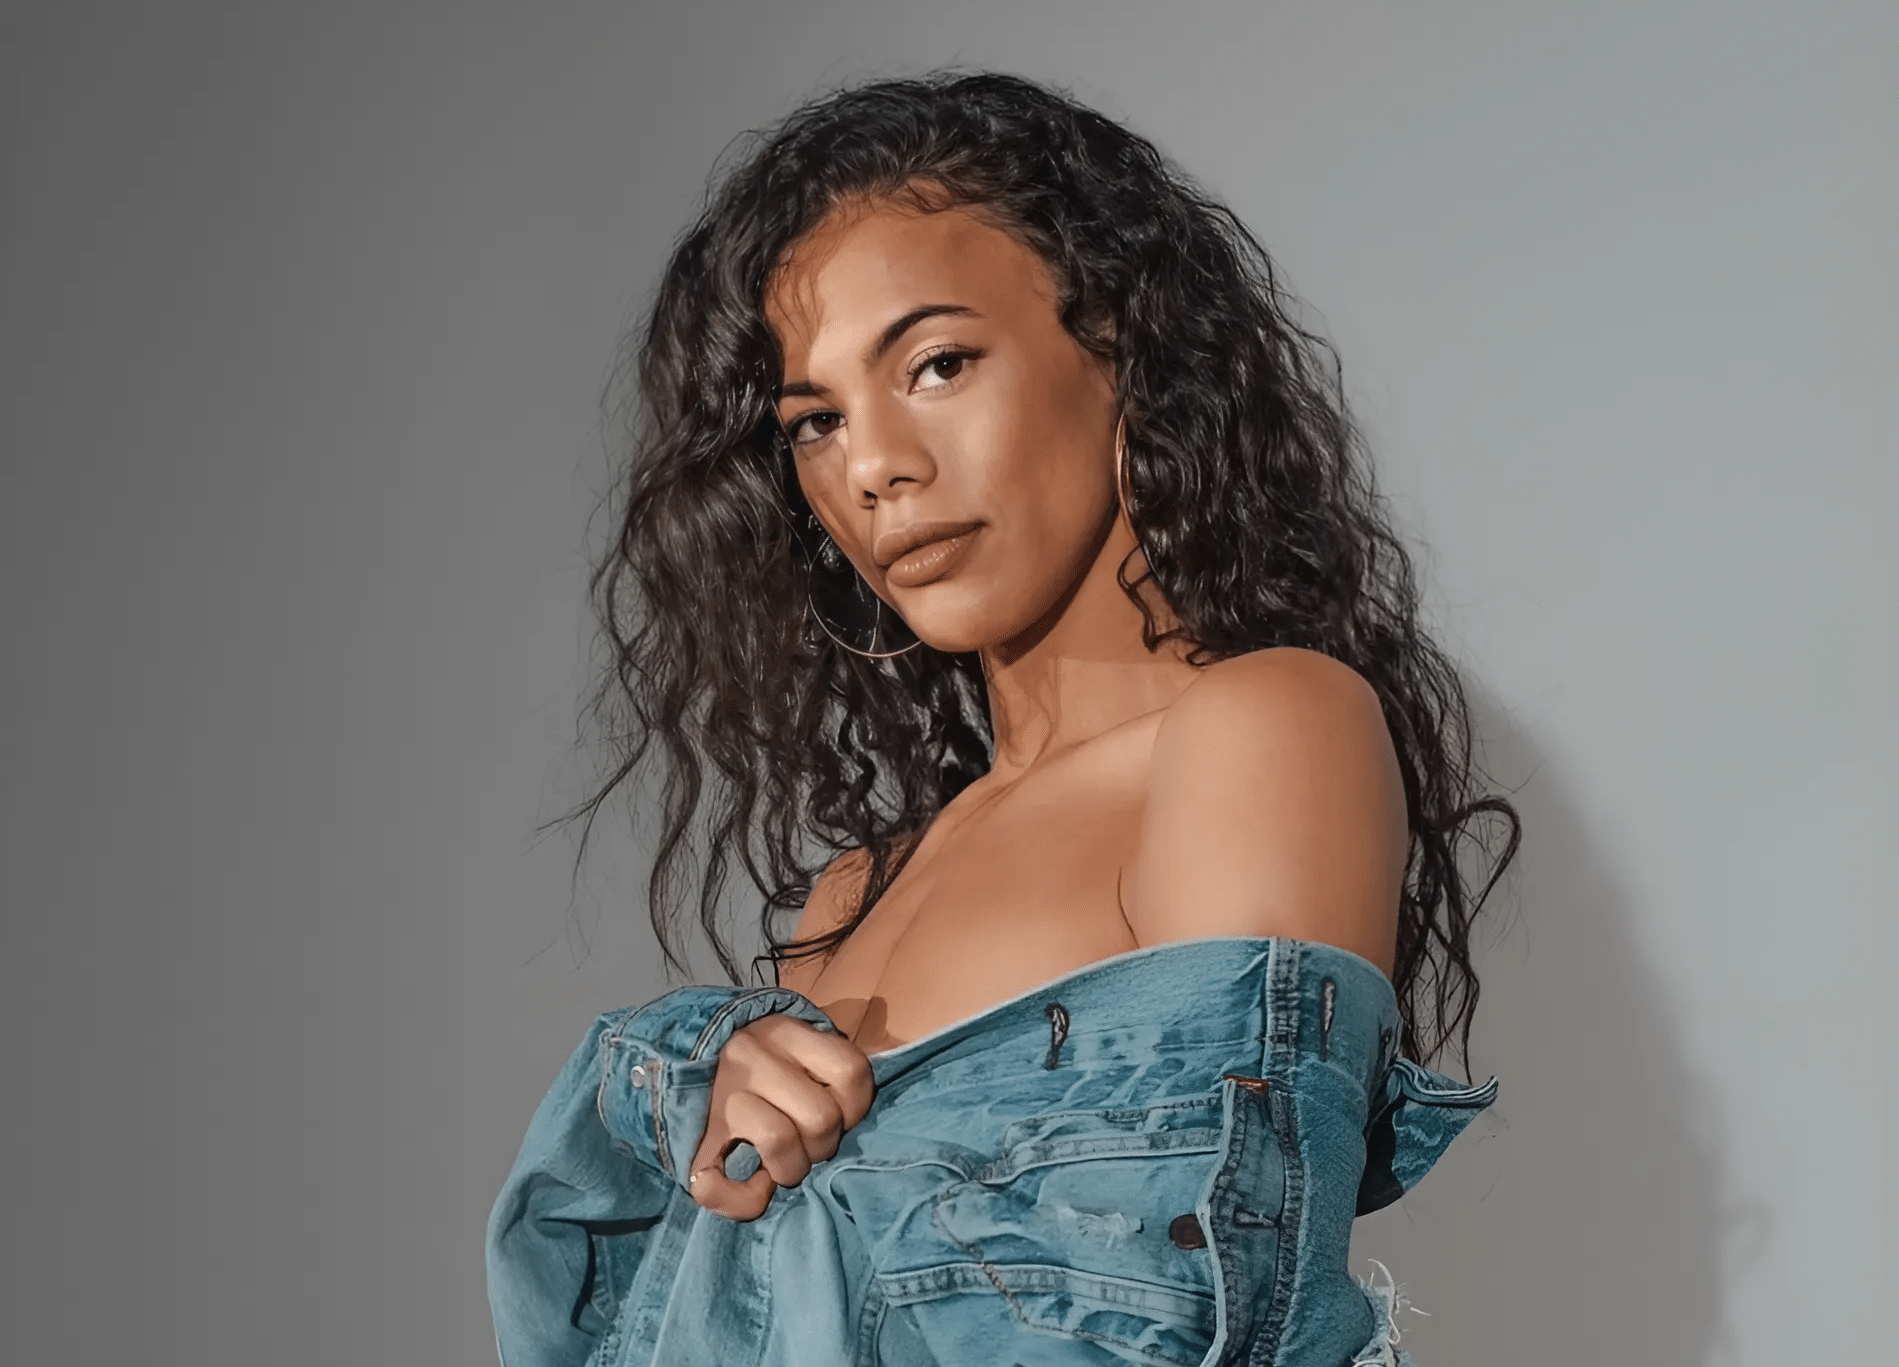 Dynamic Independent Artist Gabrielle Lynn Captivates Audiences with Latest Single "Life’s Been Crazy"